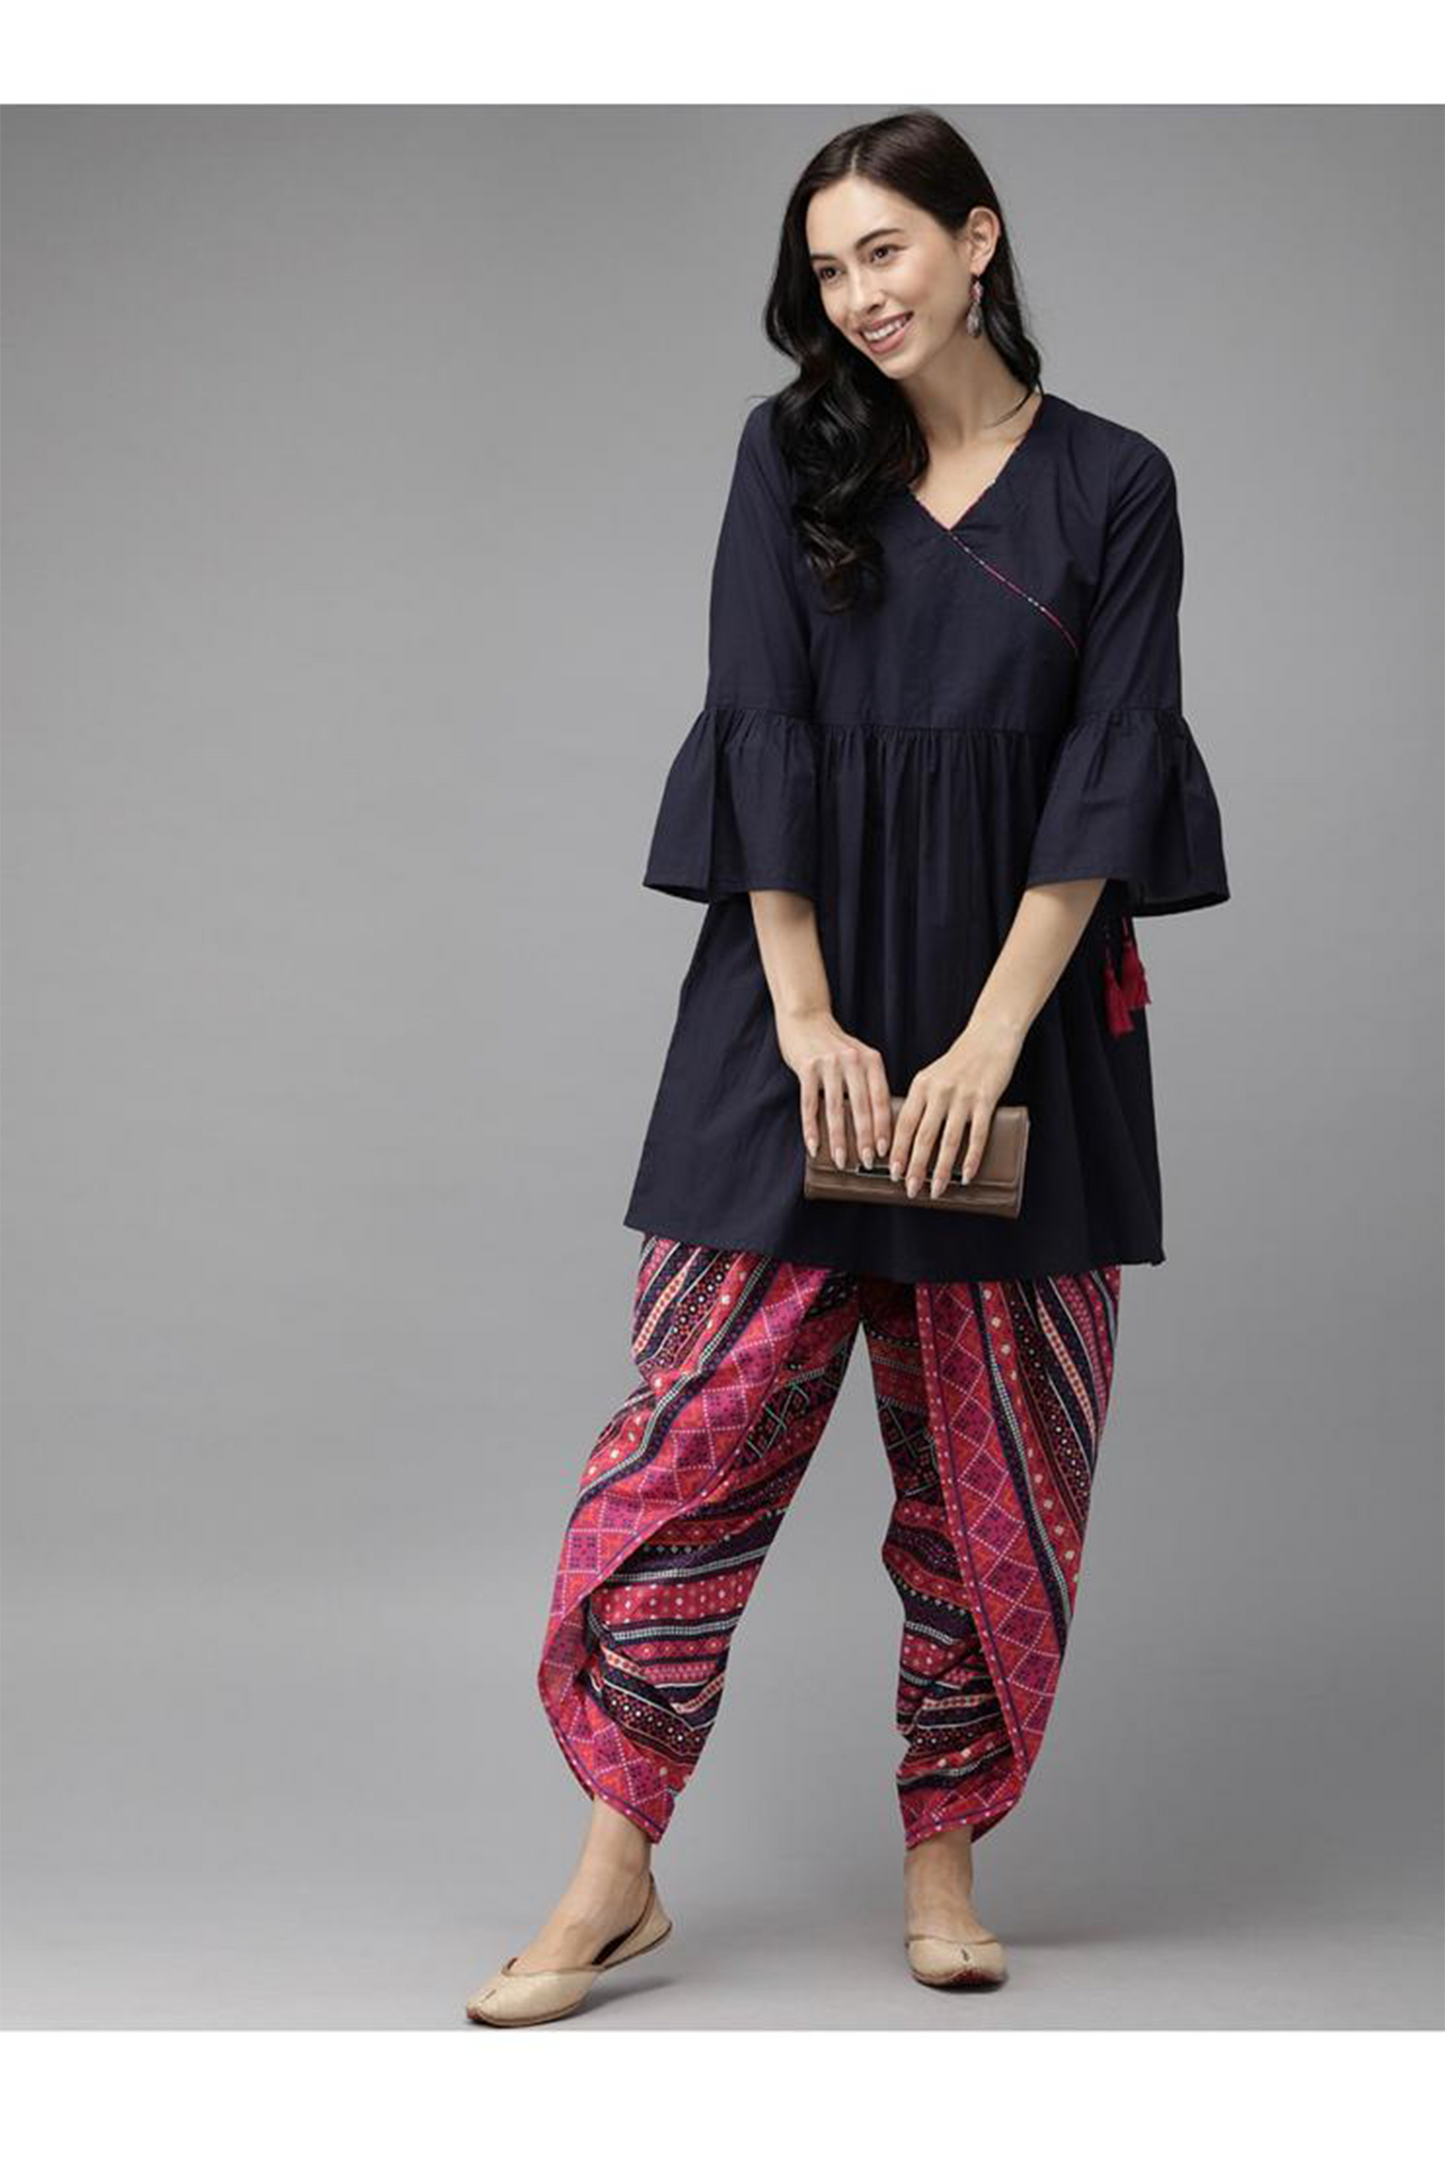 Exquisite Navy Blue Kurti with Printed Pink Dhoti